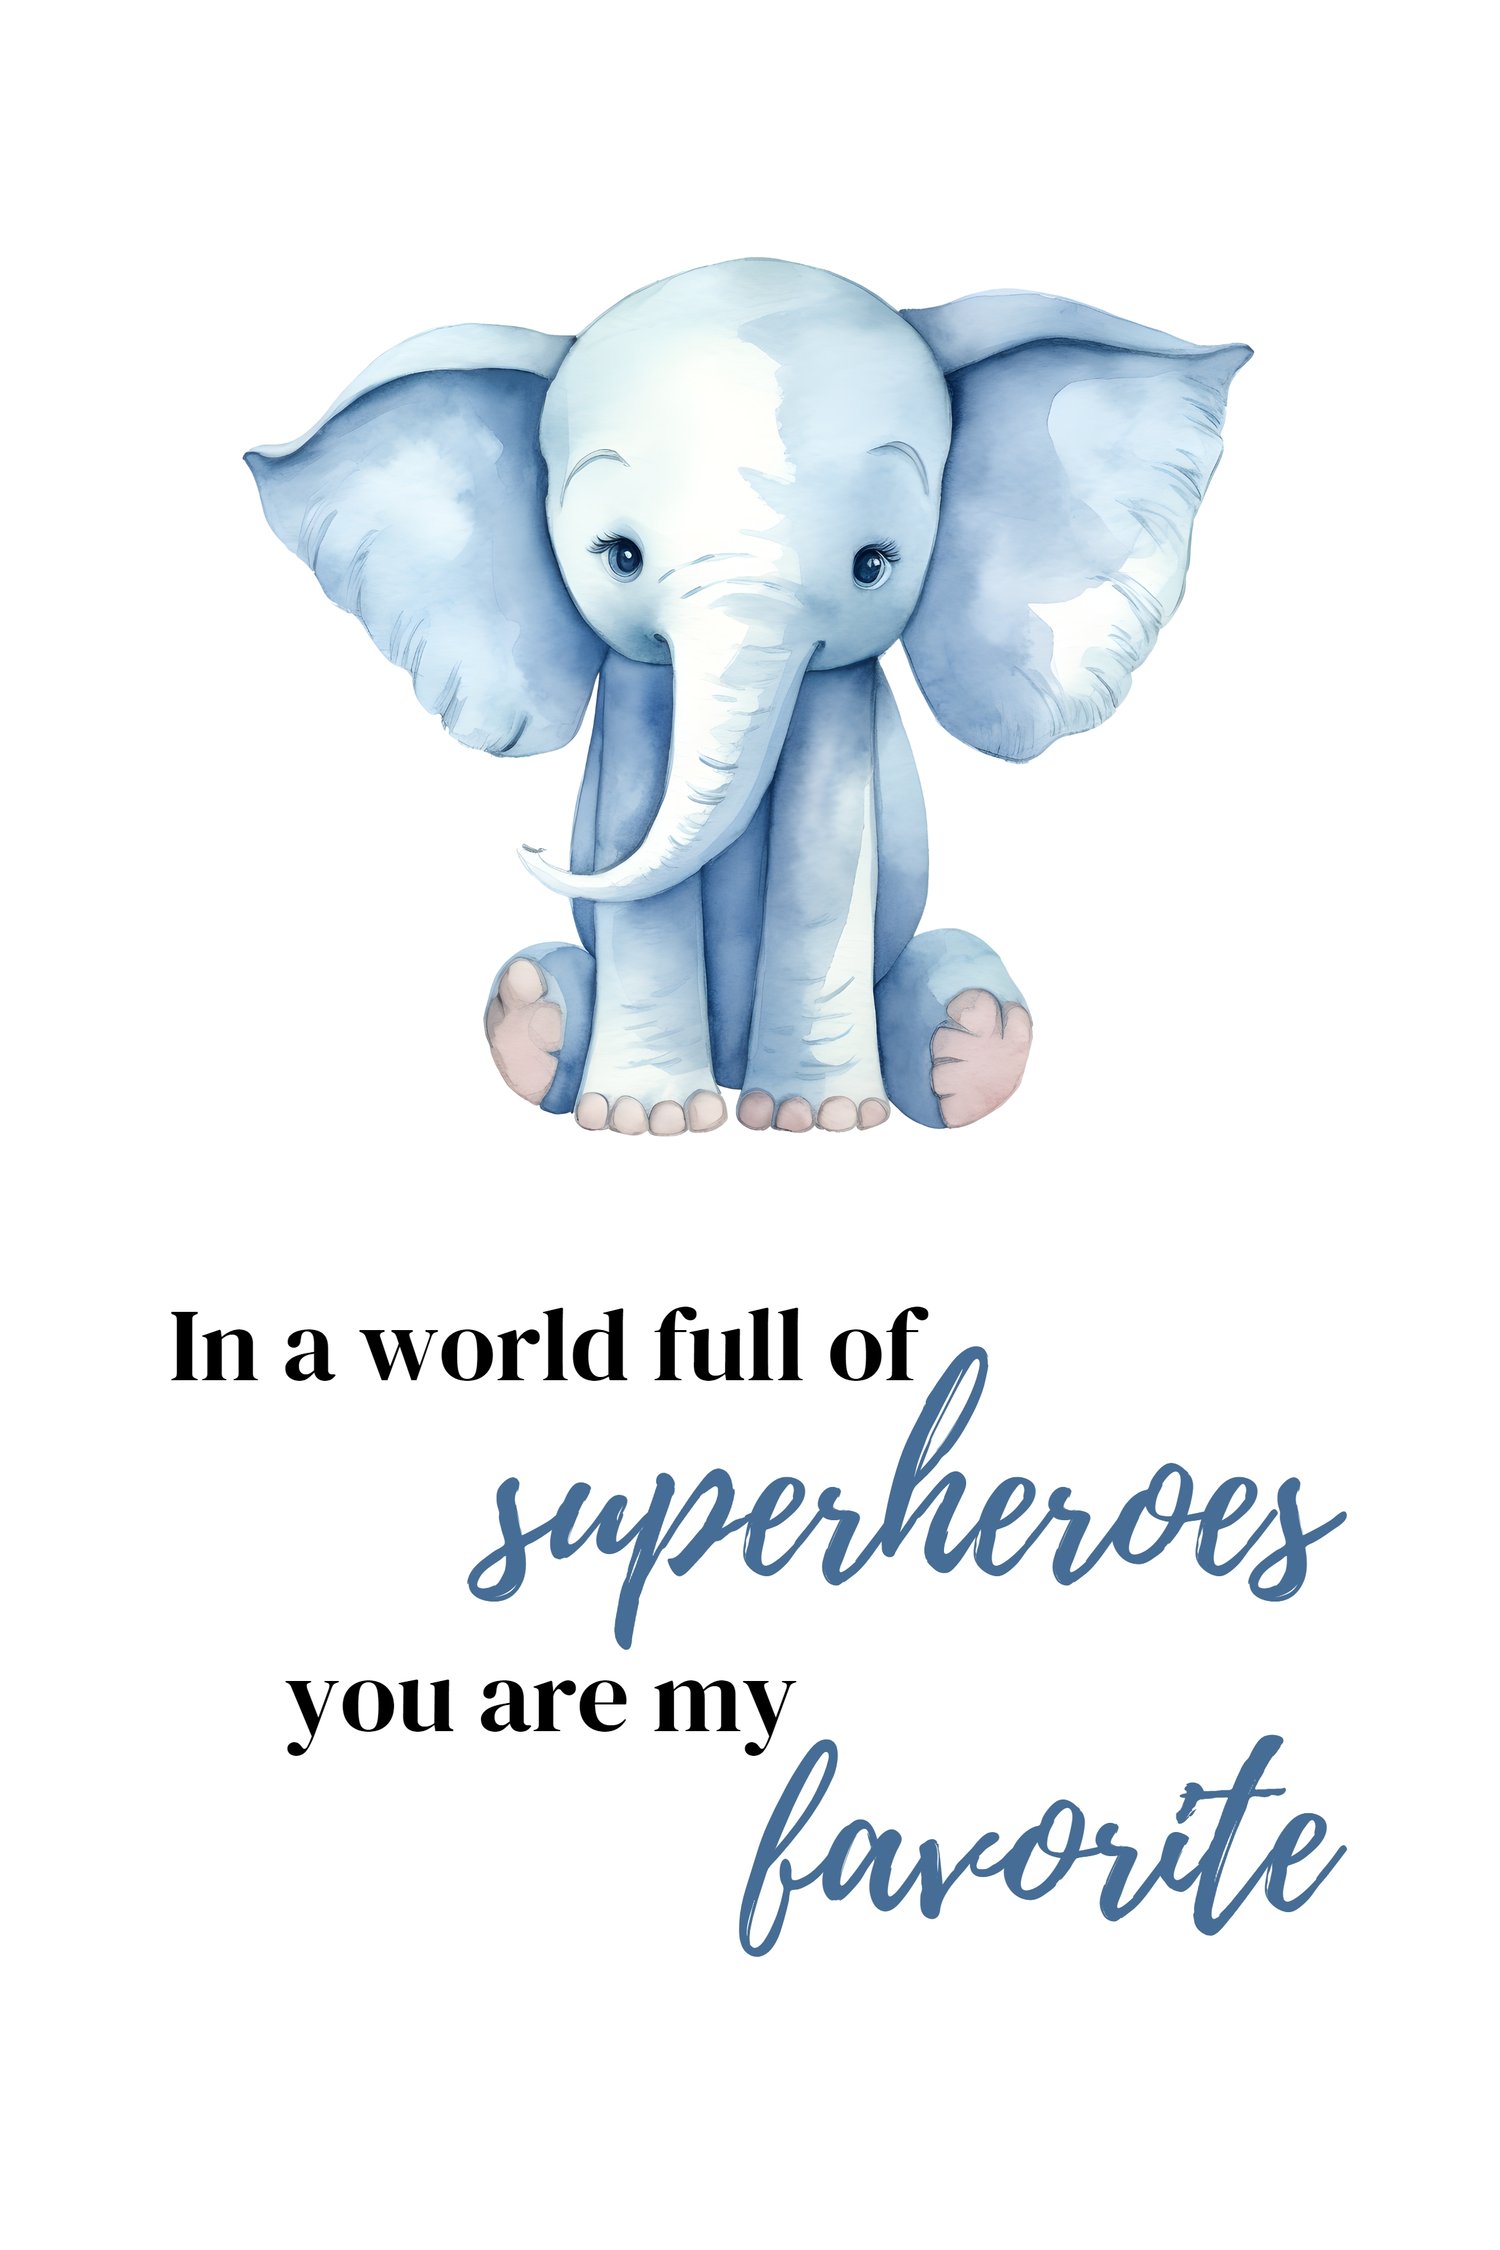 boys nursery printable art, elephant in blue,  quote says, "In a world full of superheroes you are my favorite."